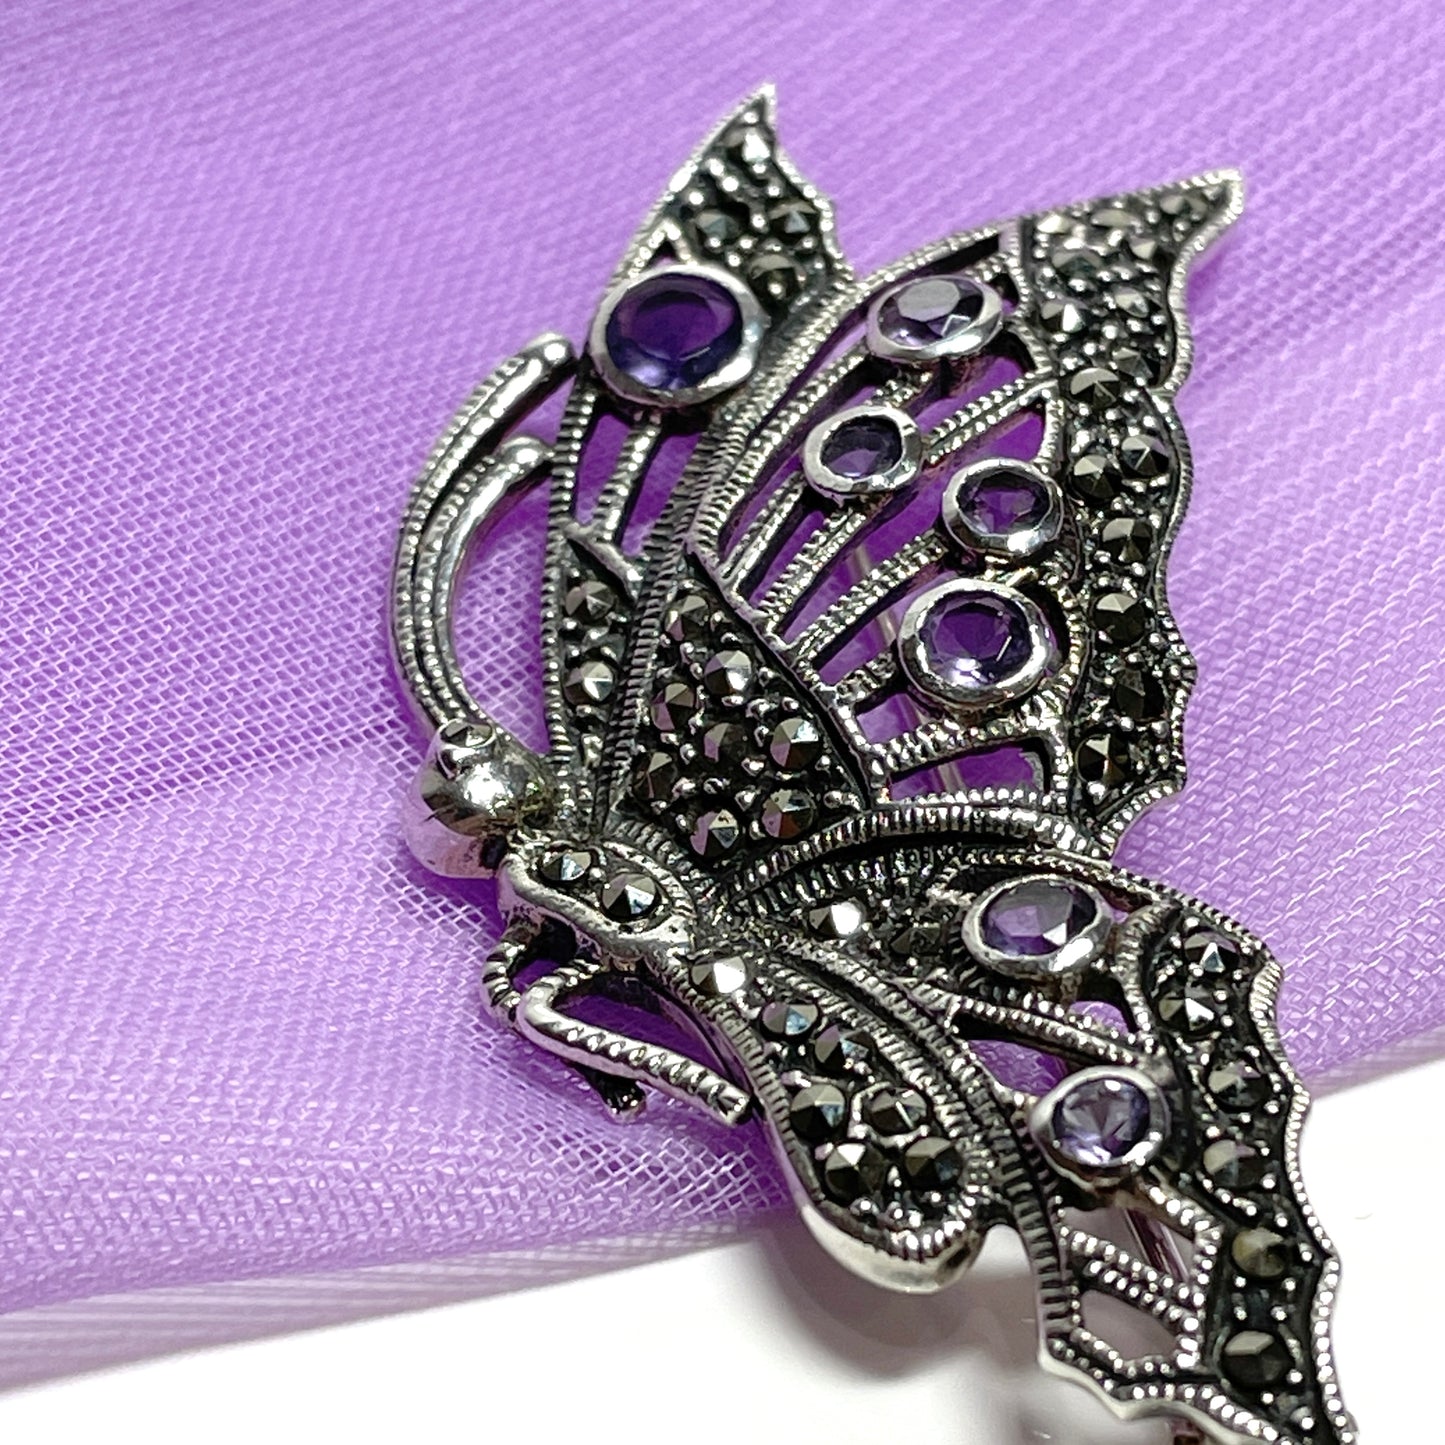 Large butterfly brooch amethyst and marcasite